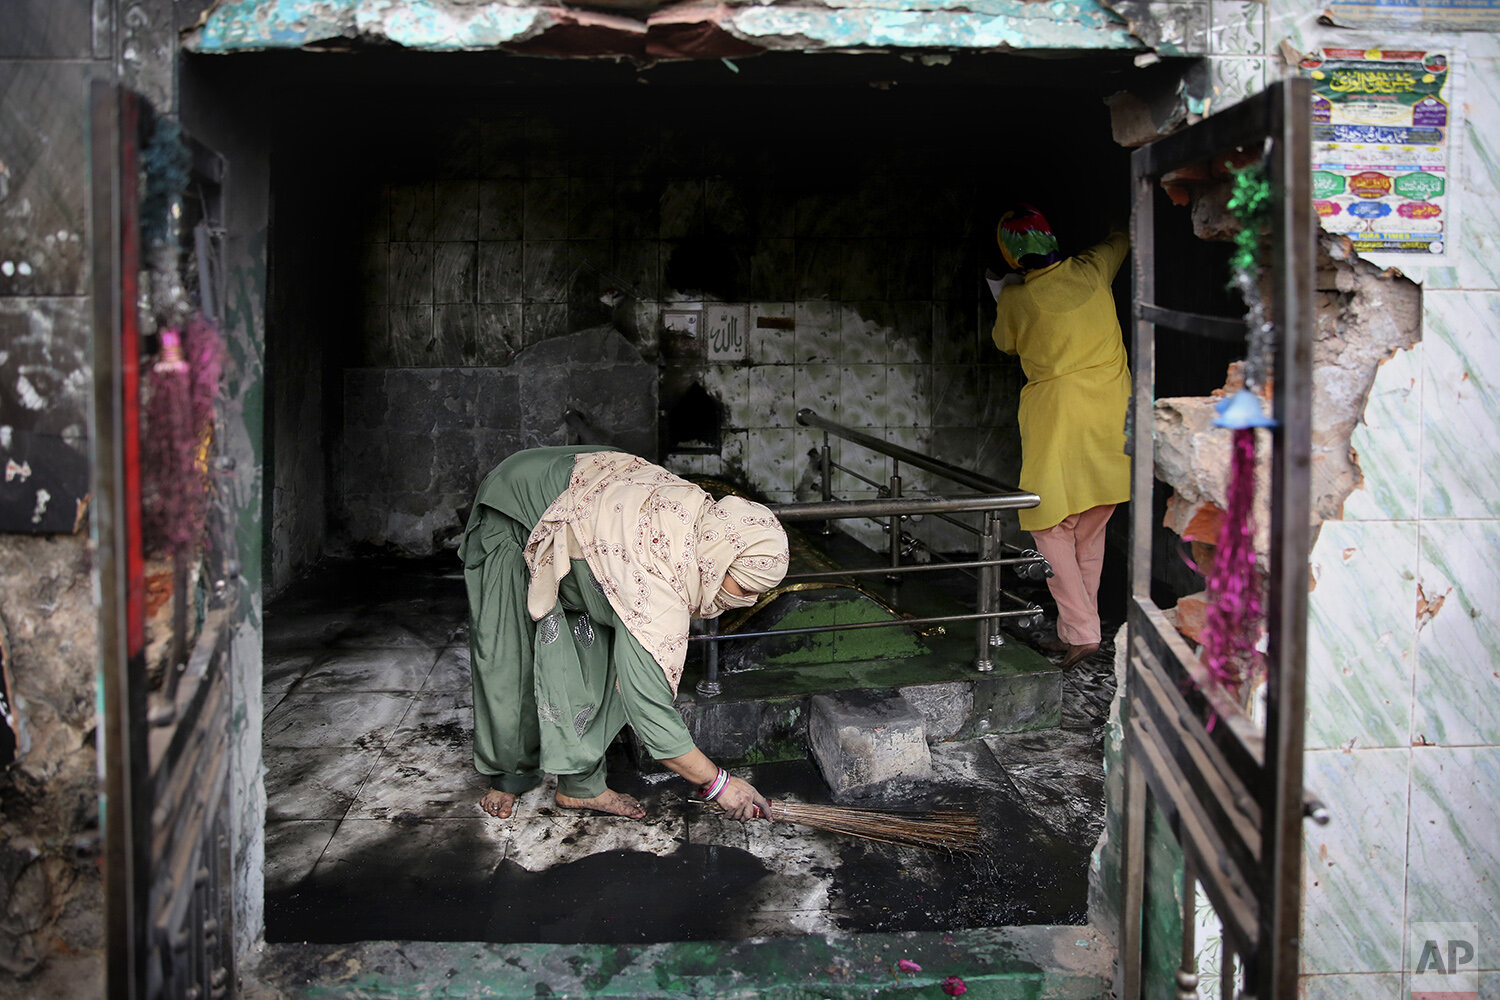  Muslim women clean a shrine burnt by a Hindu mob in Tuesday's violence in New Delhi, India, Thursday, Feb. 27, 2020. India accused a U.S. government commission of politicizing communal violence in New Delhi that killed at least 30 people and injured